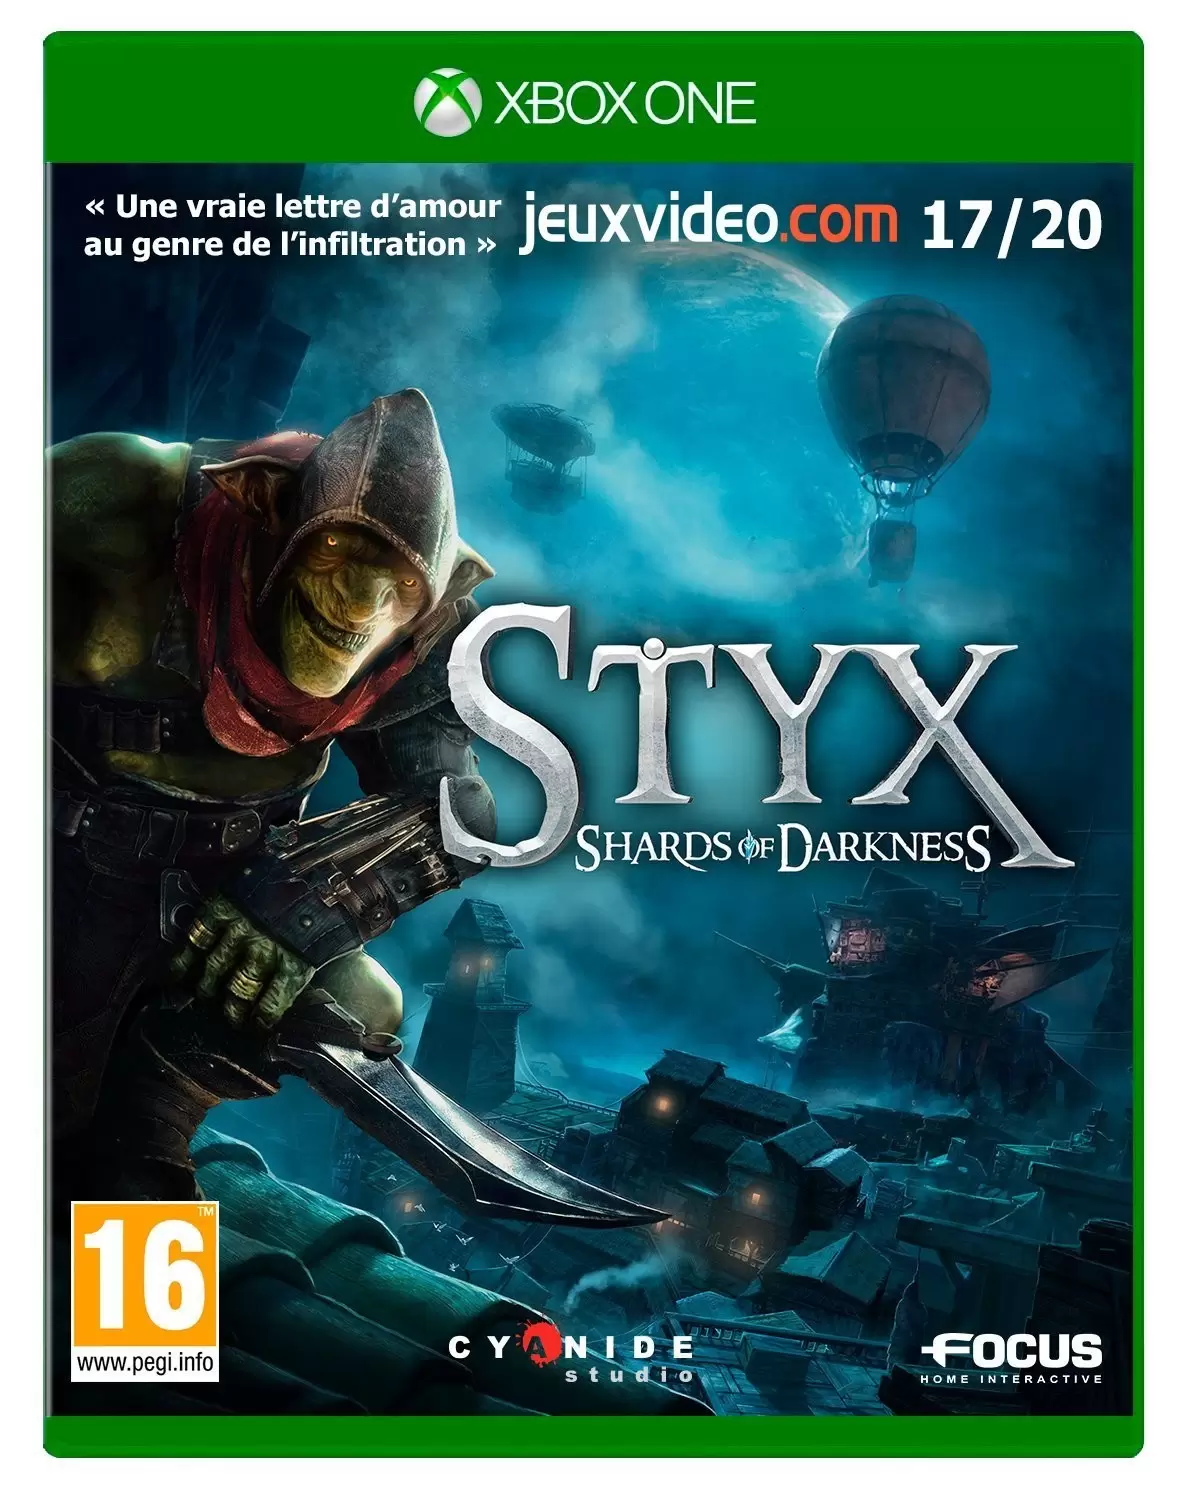 XBOX One Games - Styx : Shards of Darkness